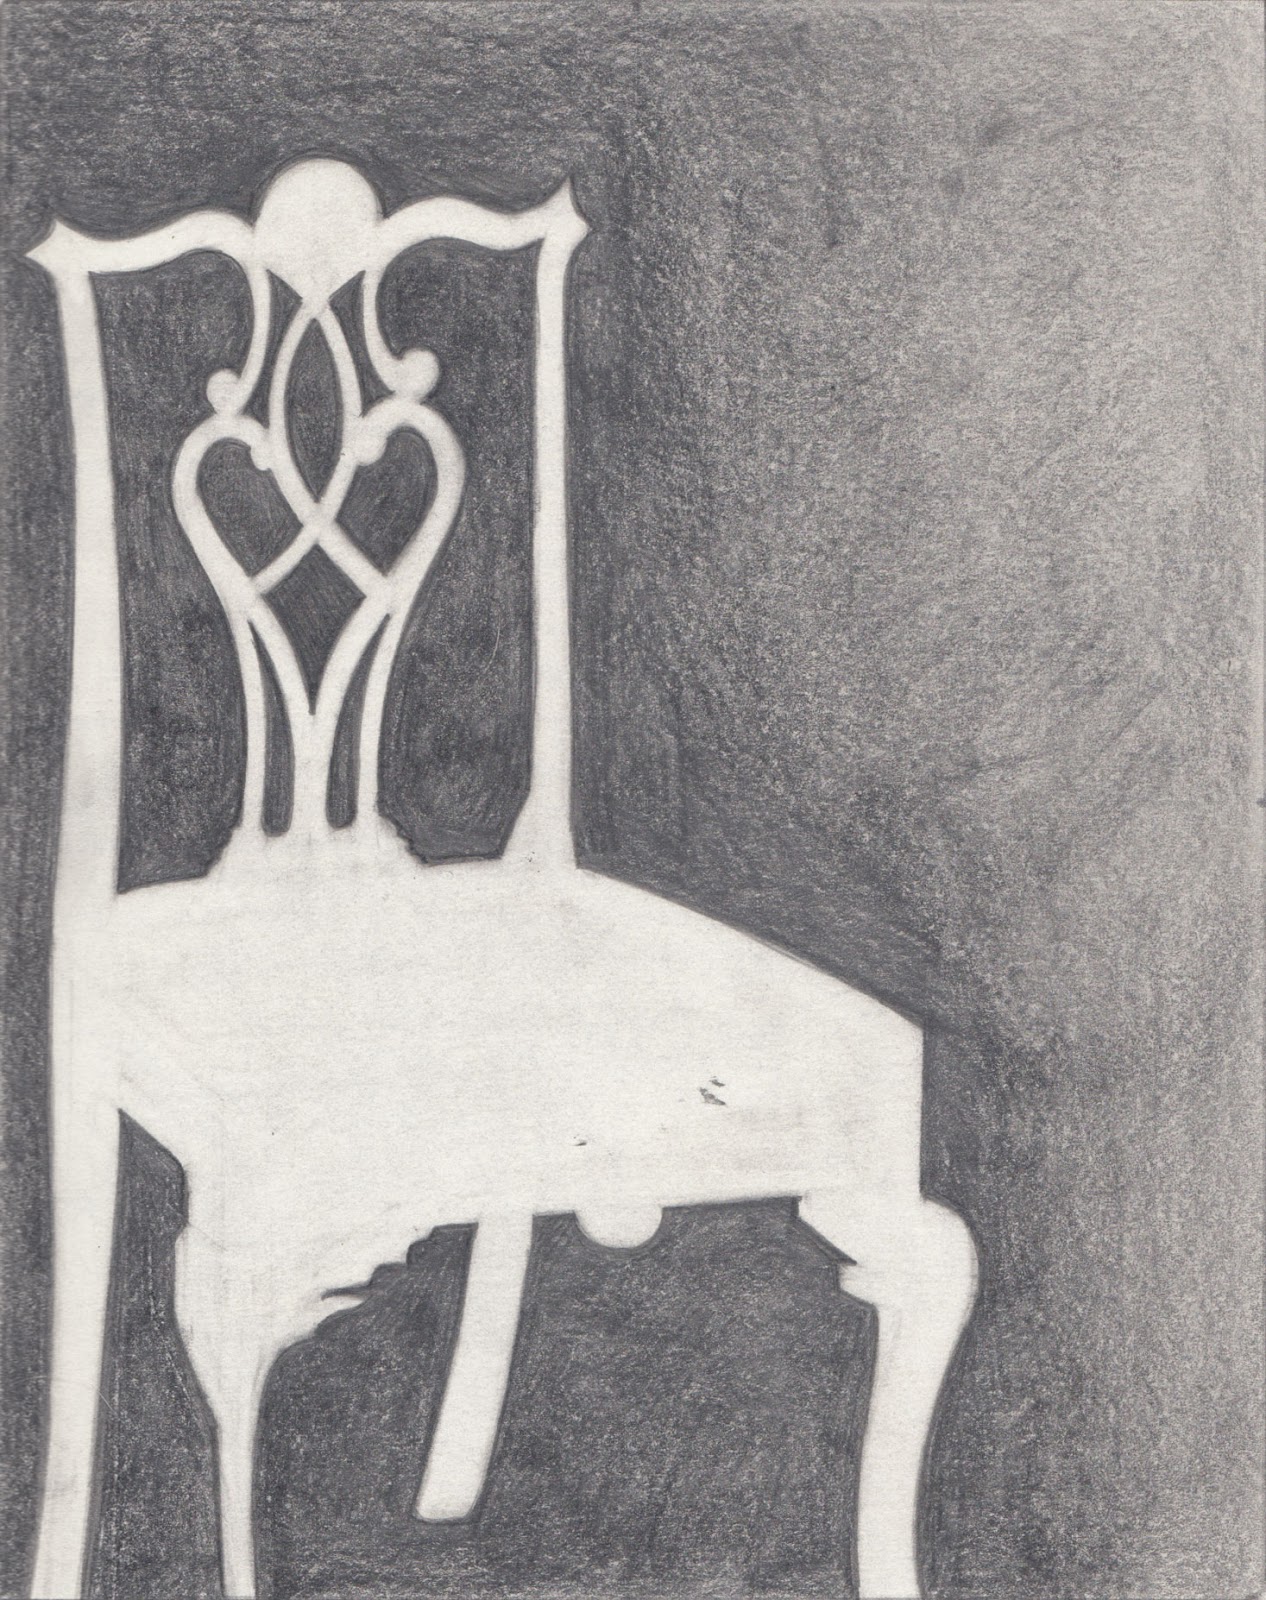 Negative Space Chair Drawing at Explore collection